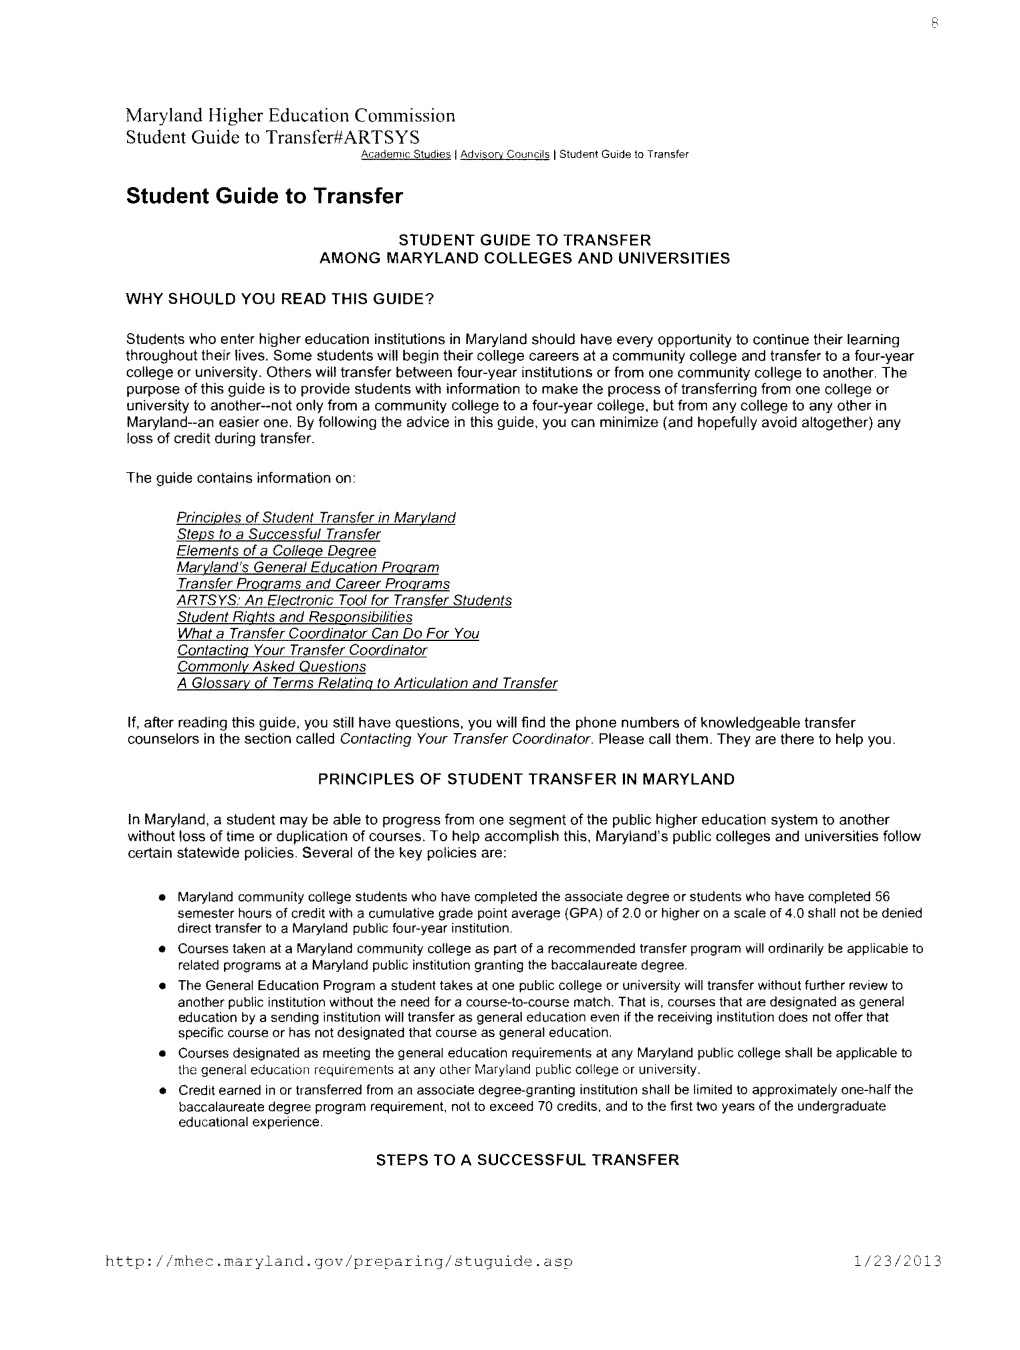 Student Guide to Transfer#ARTSYS Academic Studies I Advisory Councils I Student Guide to Transfer